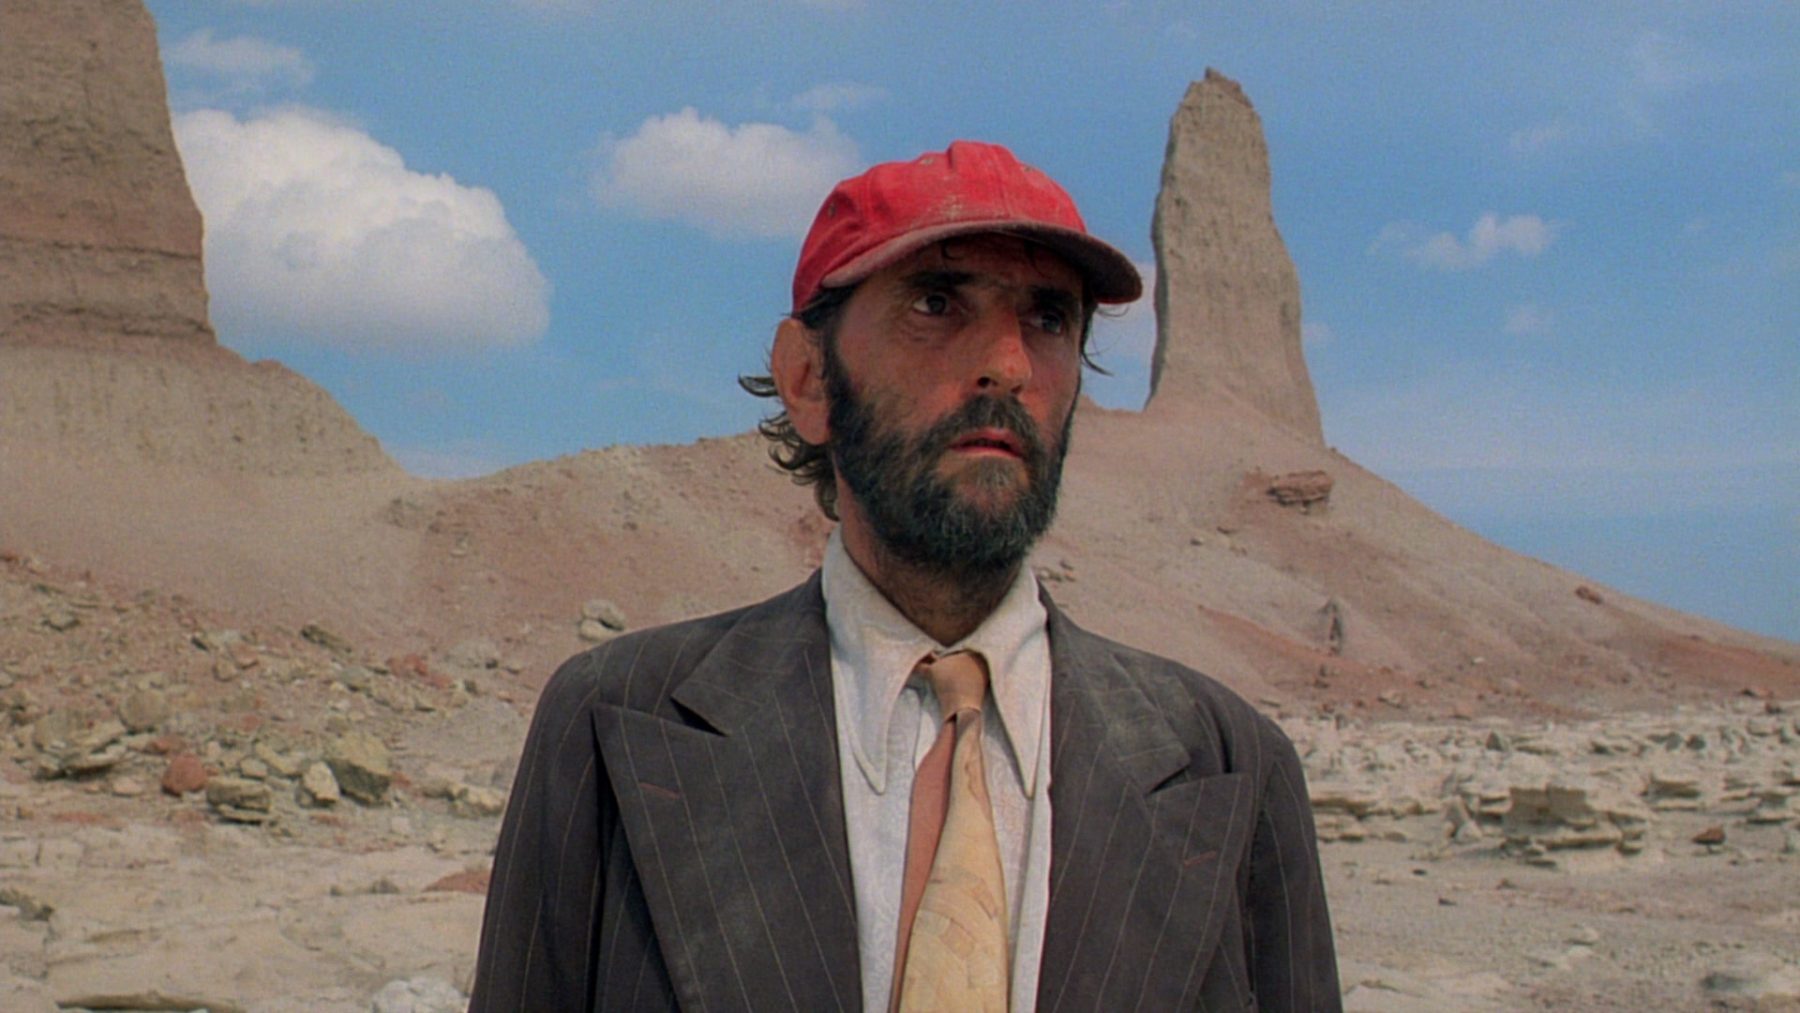 Photo of bearded man with red hat in the desert